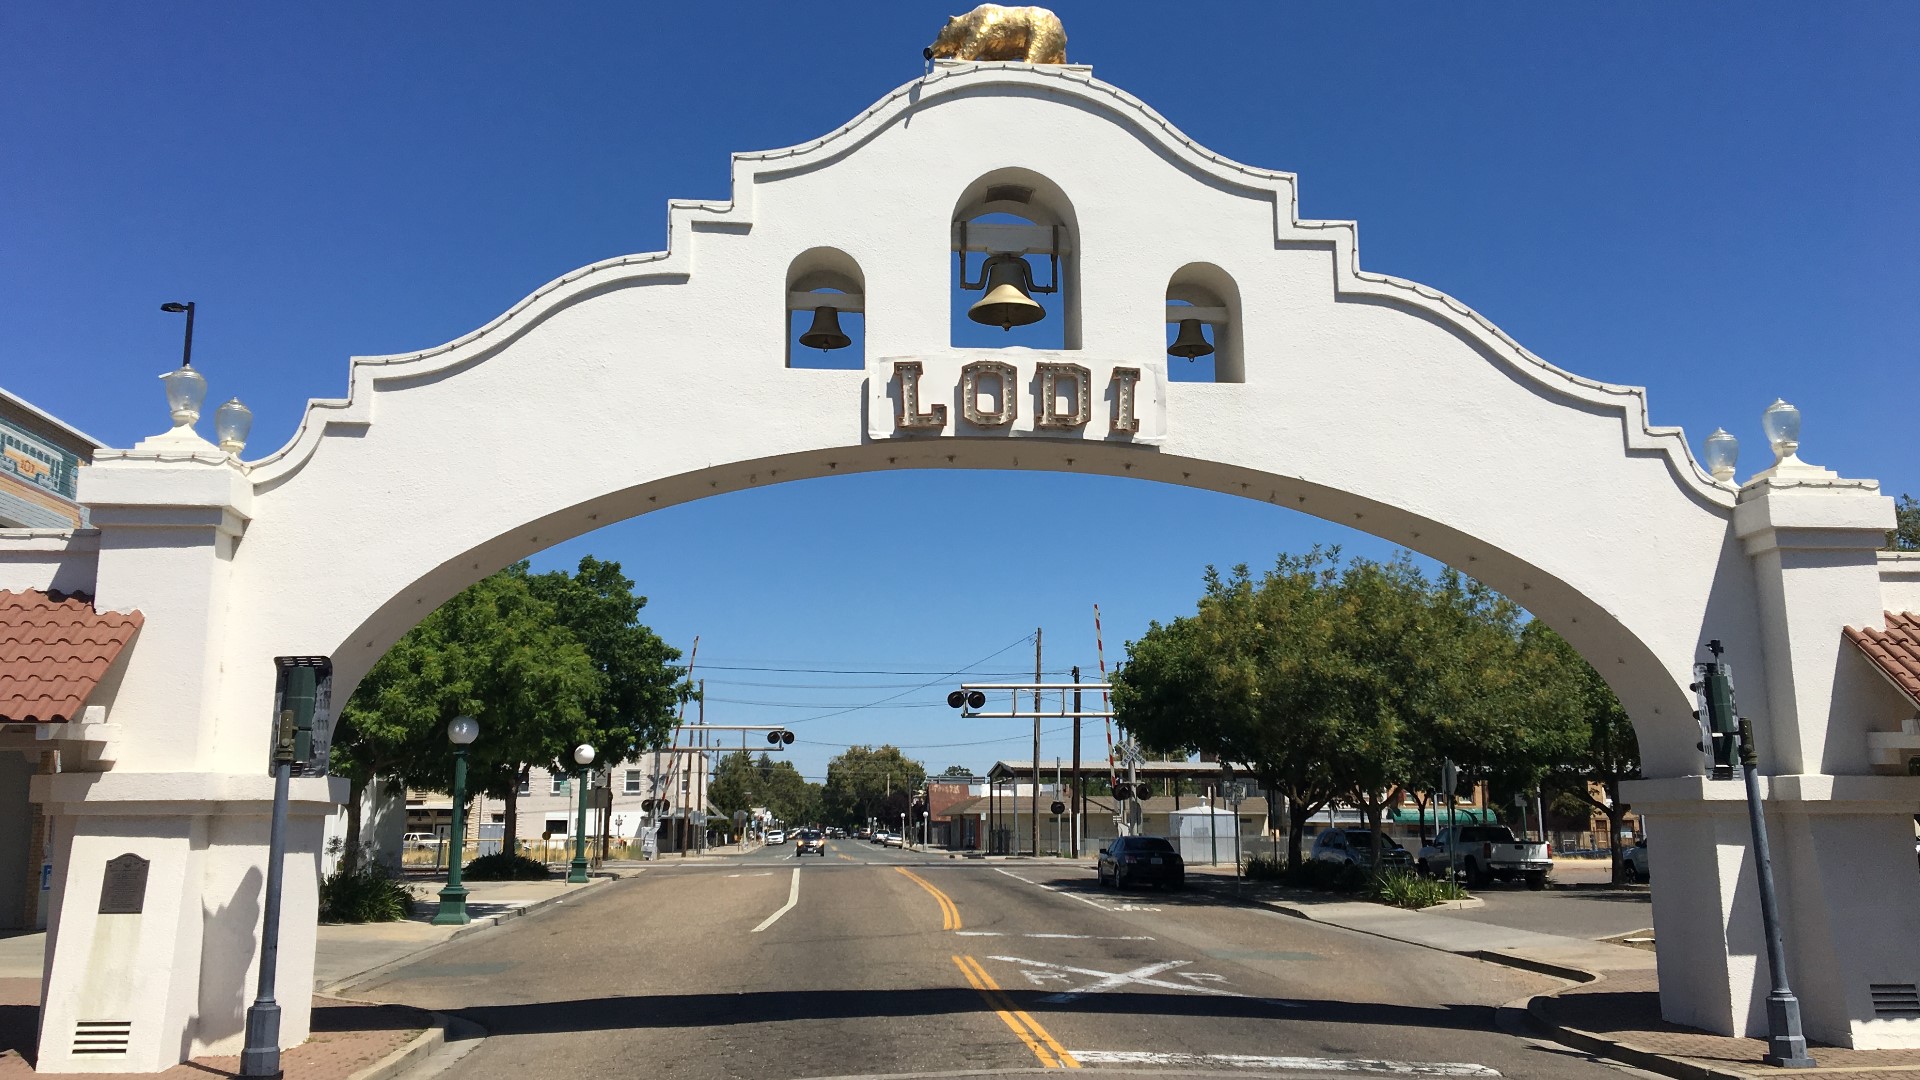 The 95240 zip code encompasses some of the most historic and scenic sights of Lodi, California. It is also one of the more popular places in the city where residents and guests can enjoy a night out on the town.